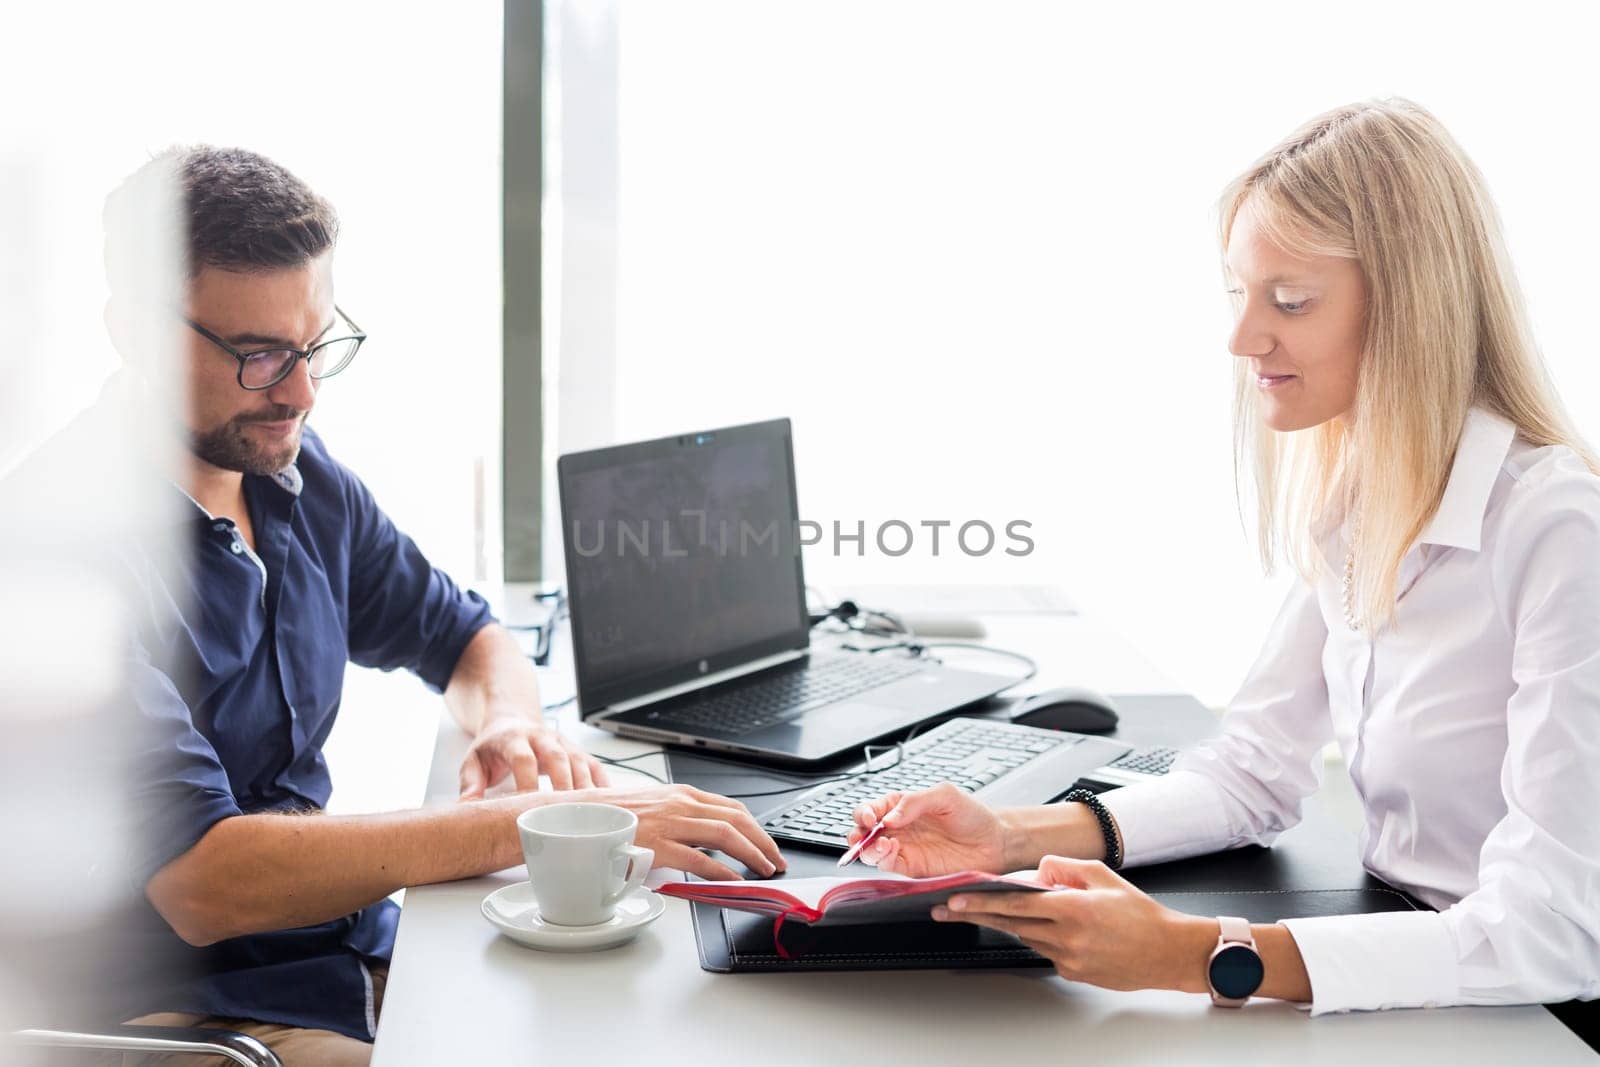 Business meeting. Client consulting. Confident business woman, real estate agent, financial advisor explaining details of project or financial product to client in office